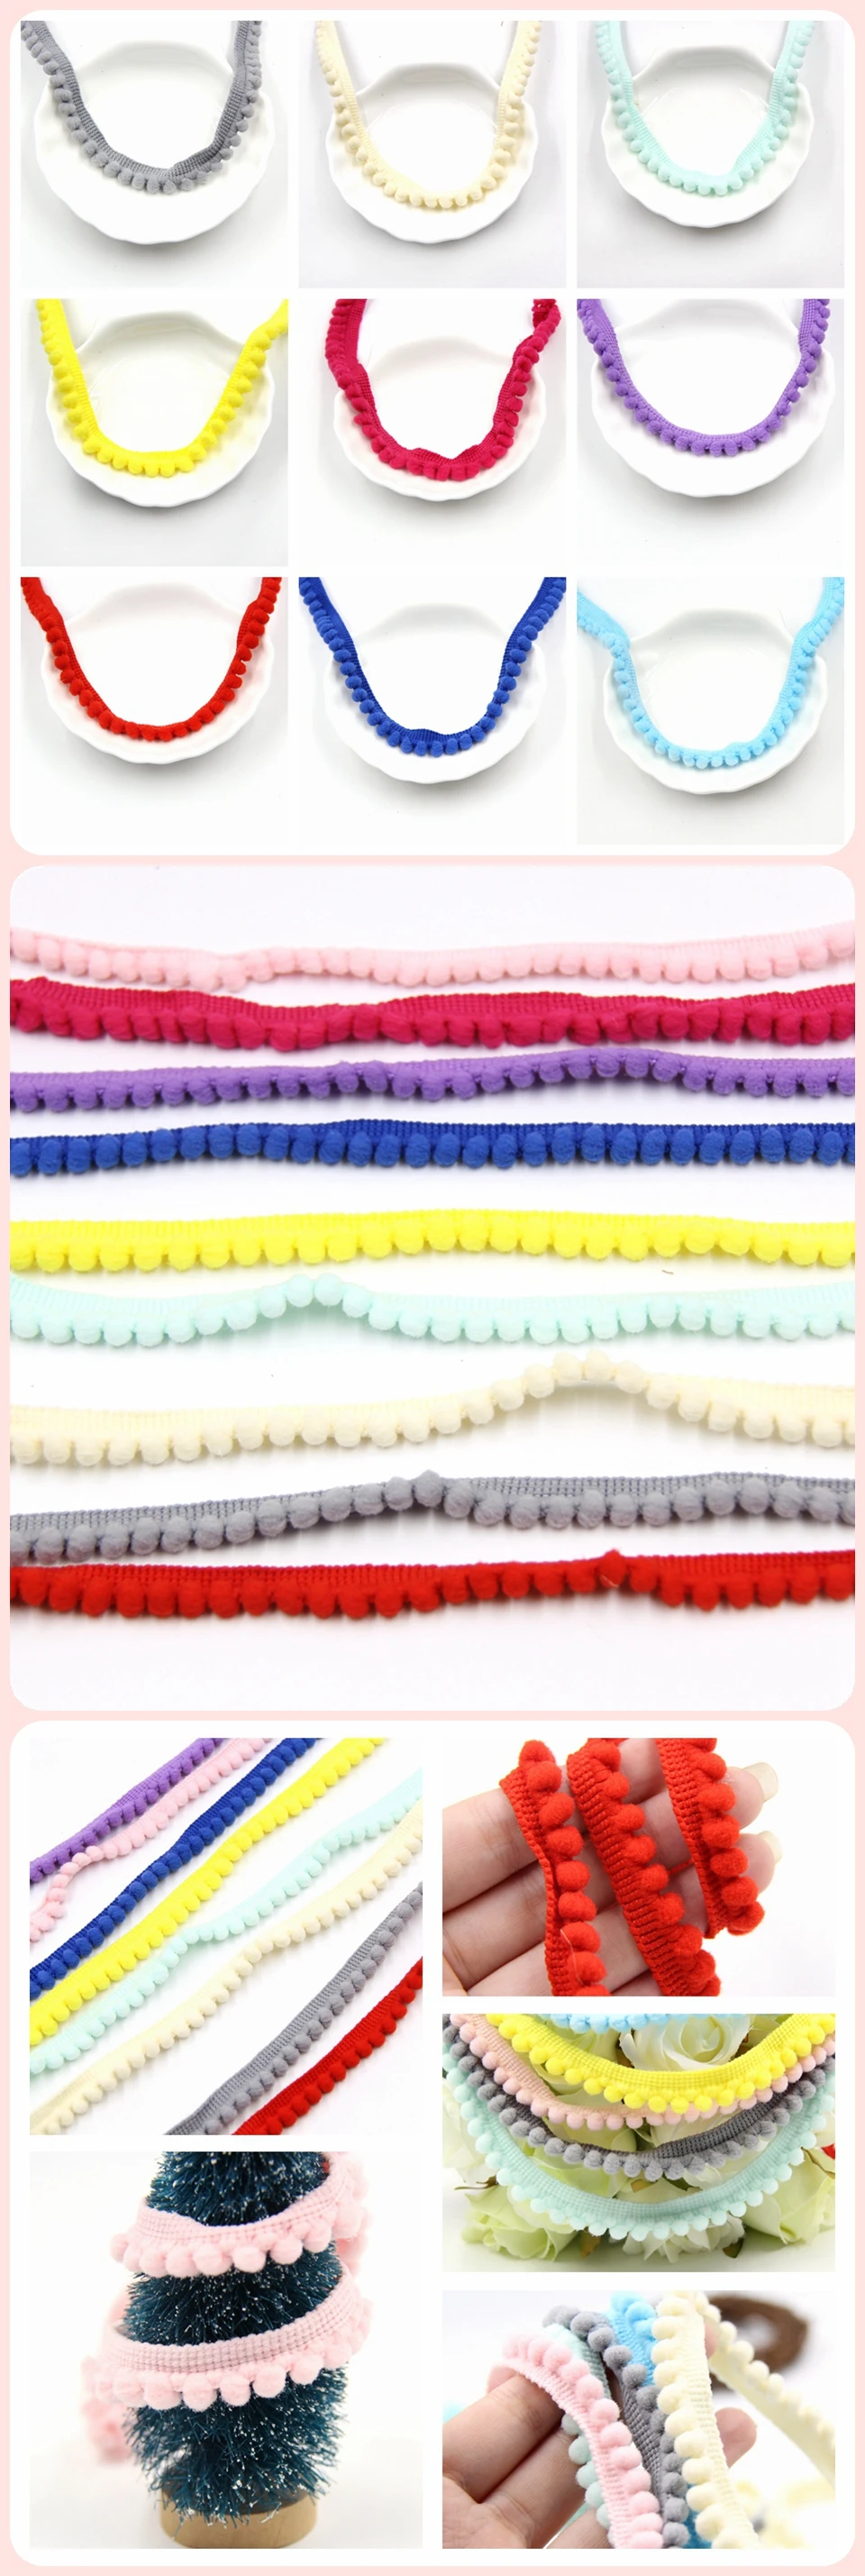 New 5Yards/Lot 5MM/10MM Pom Pom Trim Ball Fringe Ribbon Sewing Accessory Lace For Home Party Decoration DIY Gifts Supplies